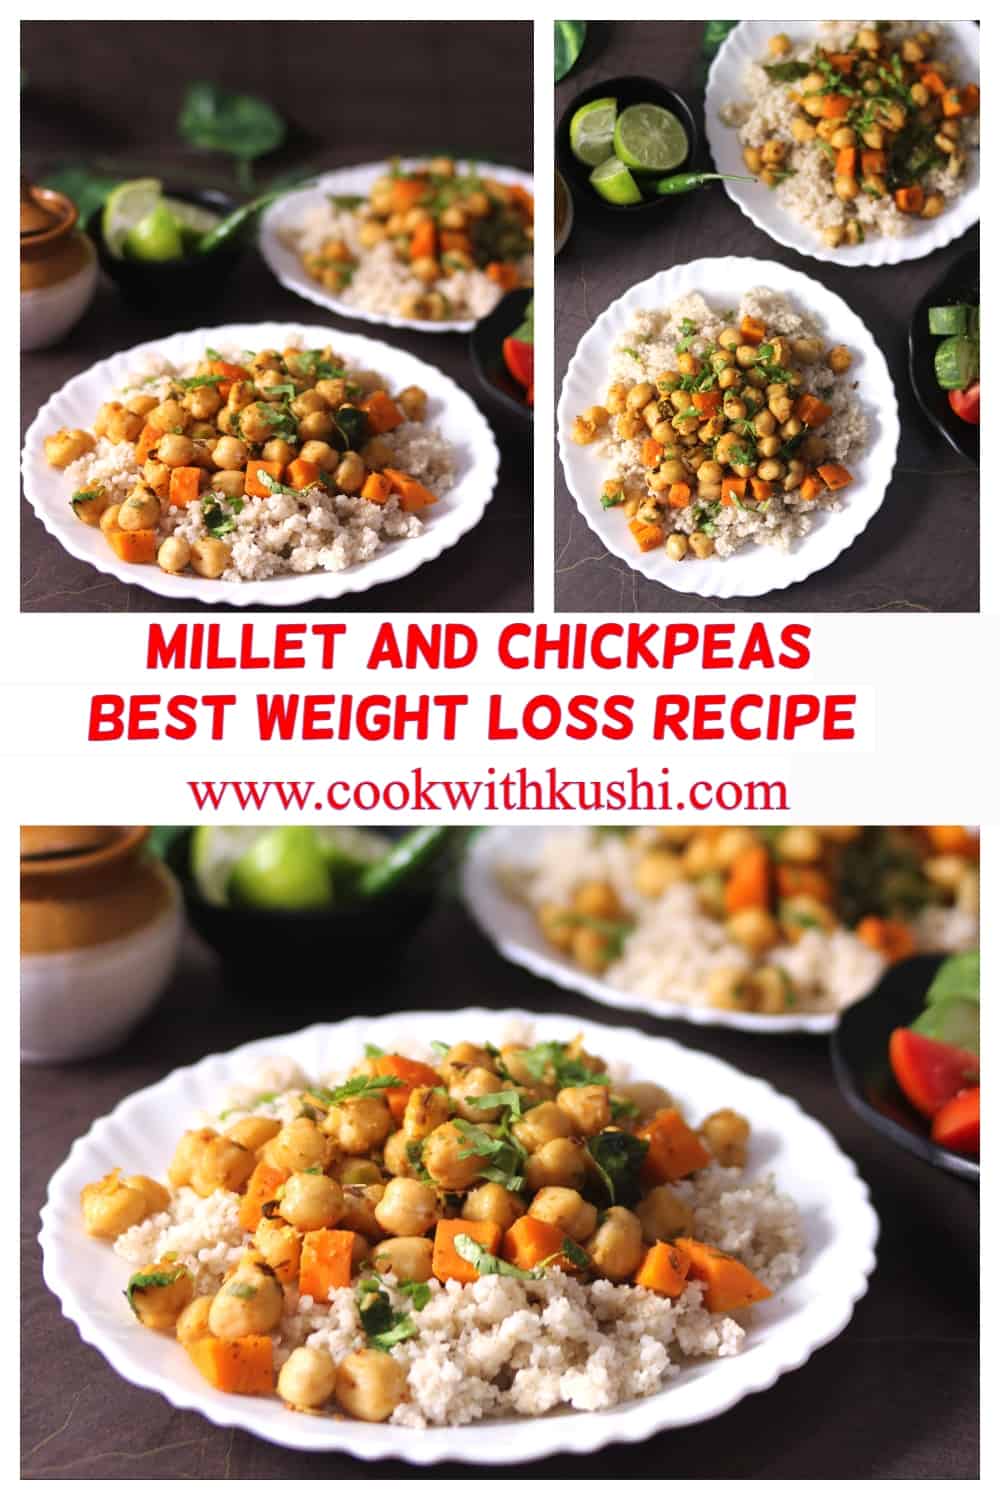 3 different images of samak ke chawal and chana, chickpeas and millet, weight loss recipe